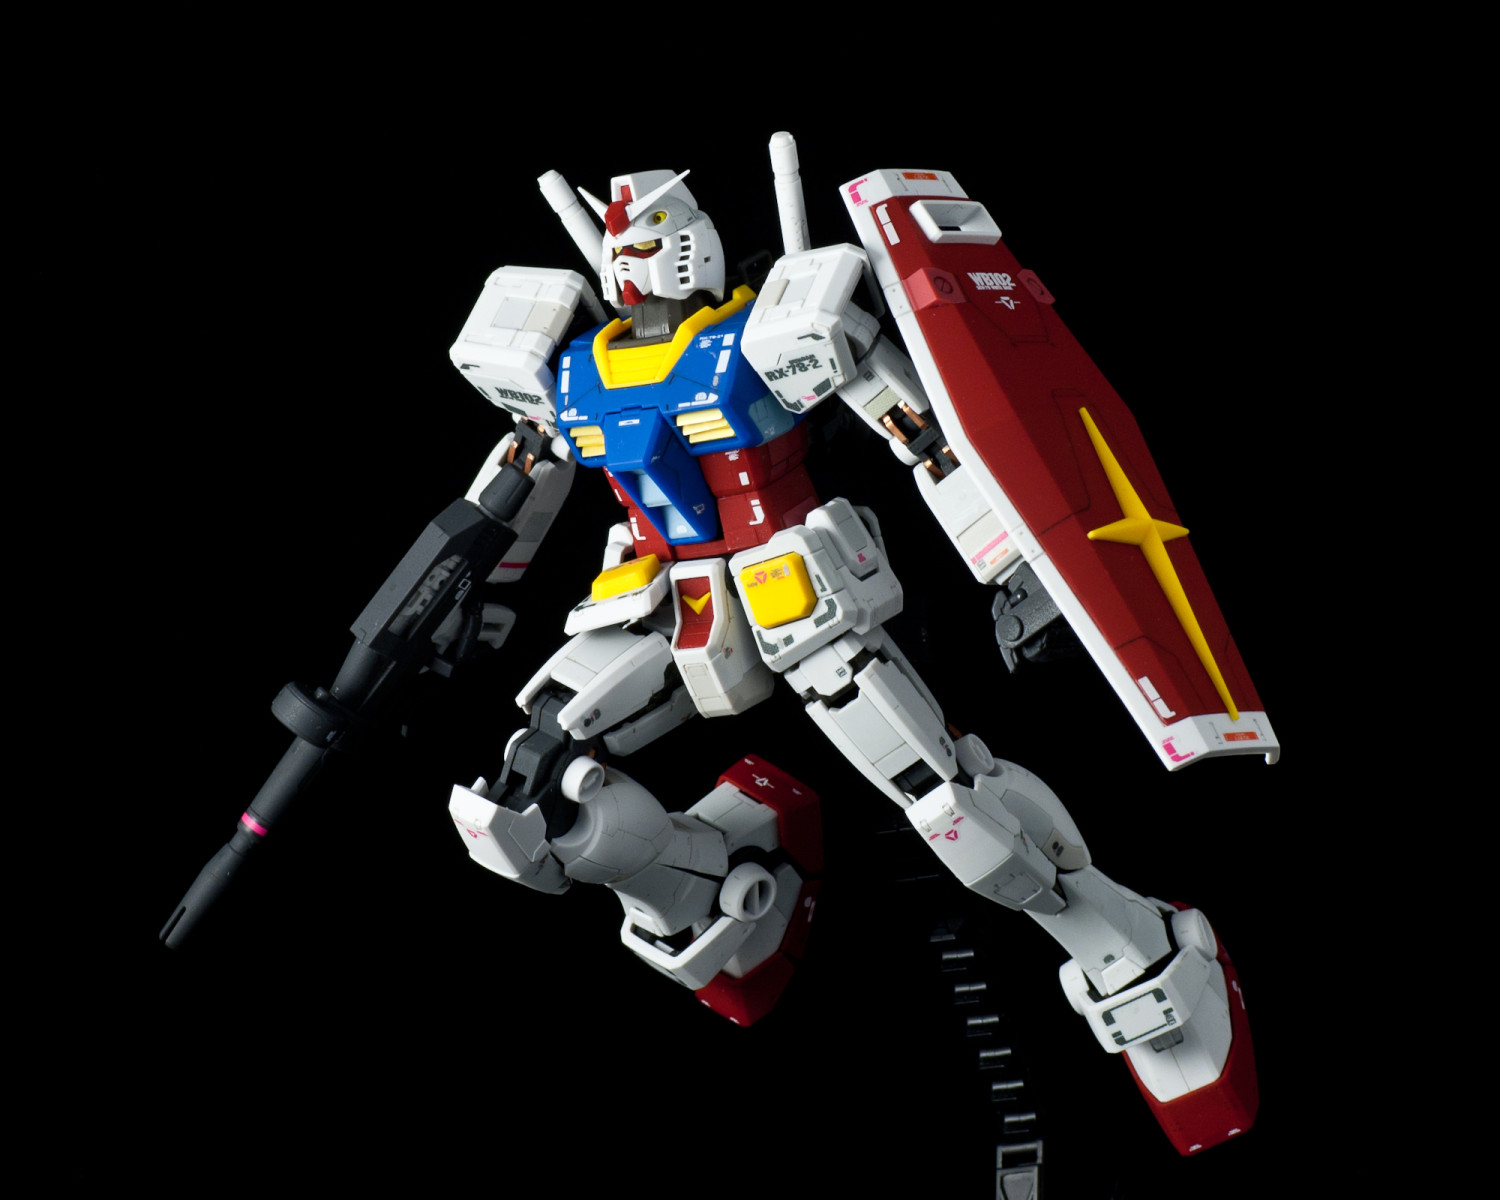 The Gundam’s butt can also open to either mount the hyper bazooka or accept...